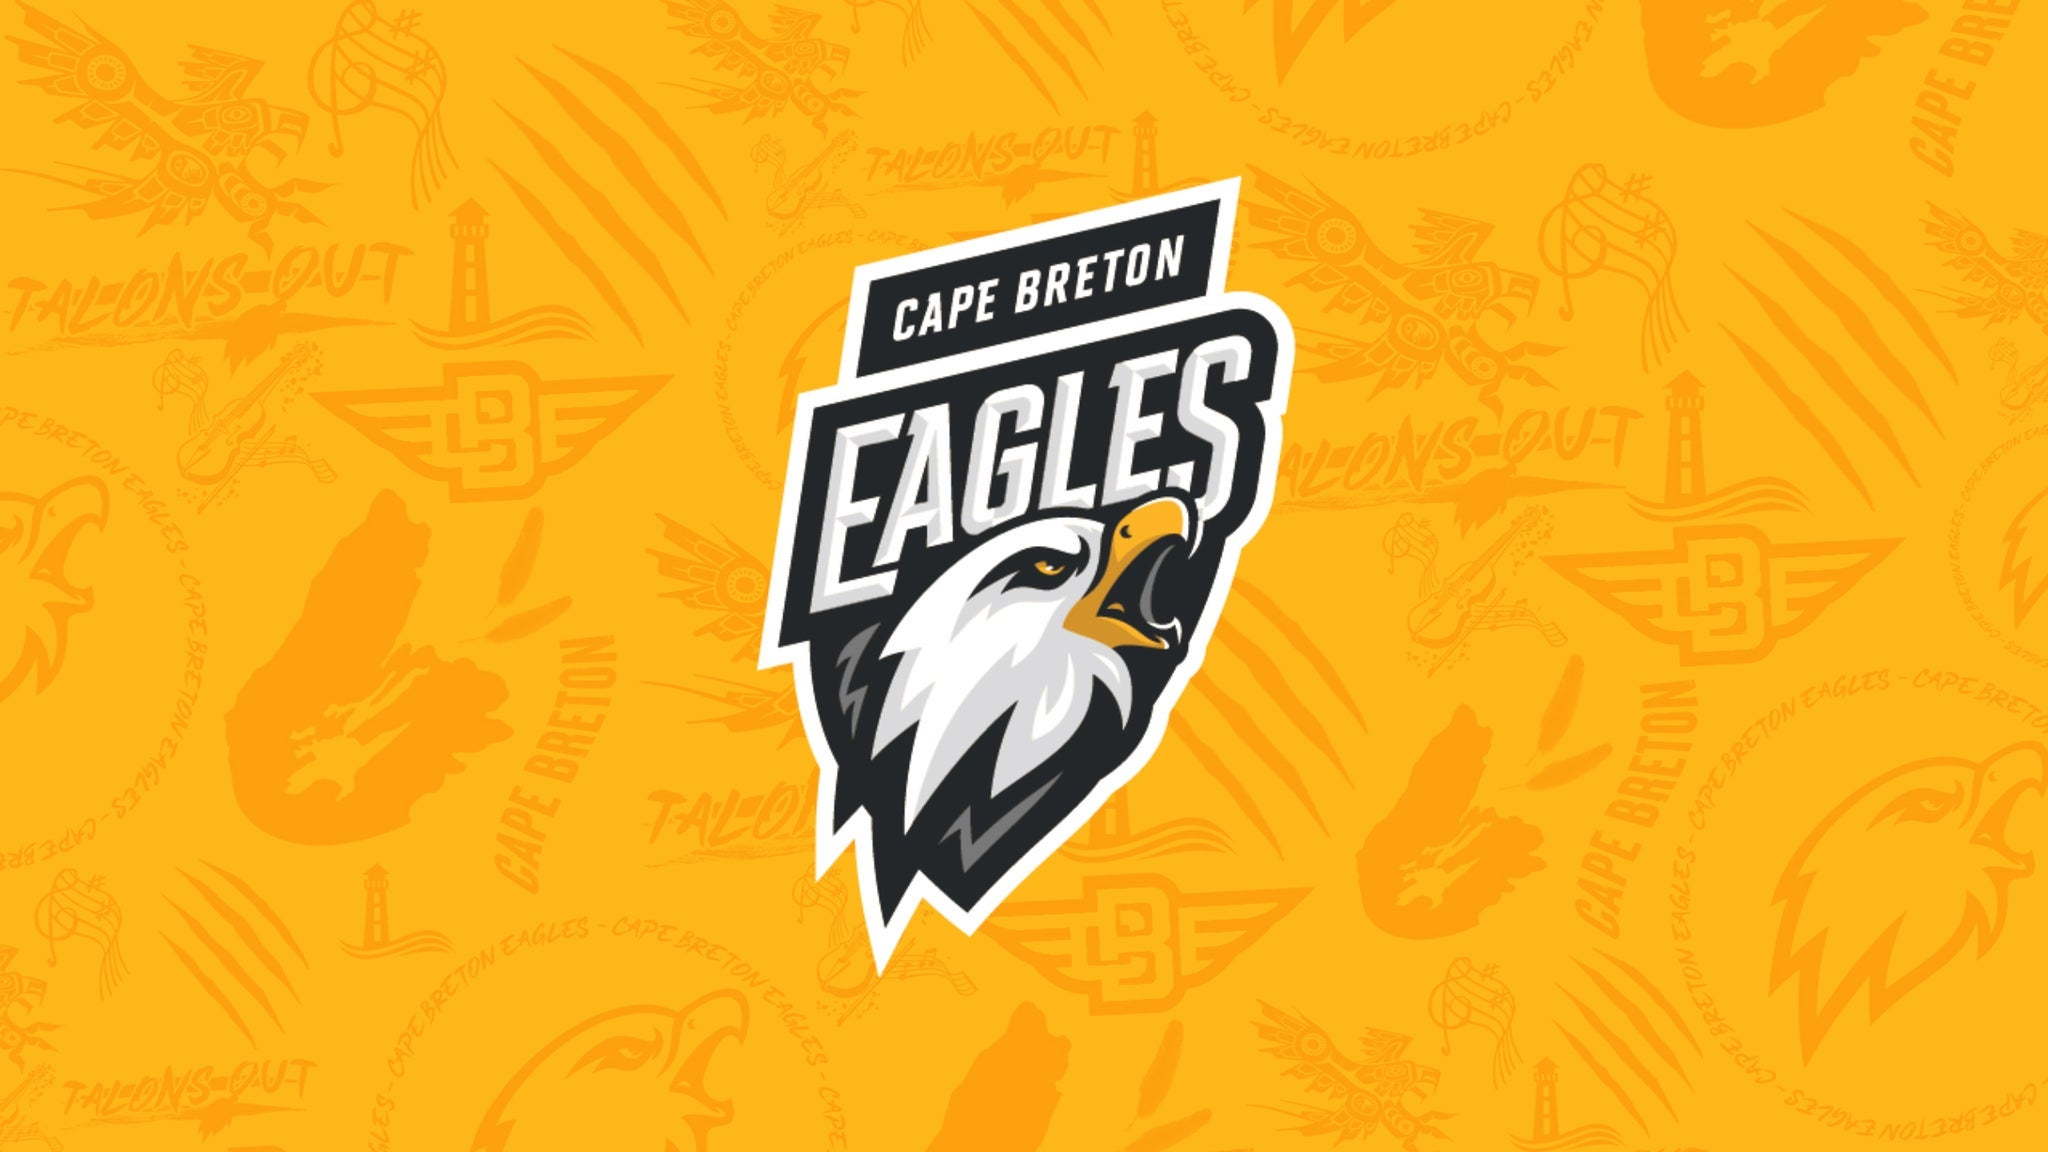 Cape Breton Eagles vs. Moncton Wildcats in Sydney promo photo for FRIDAY 4 for 50$ presale offer code